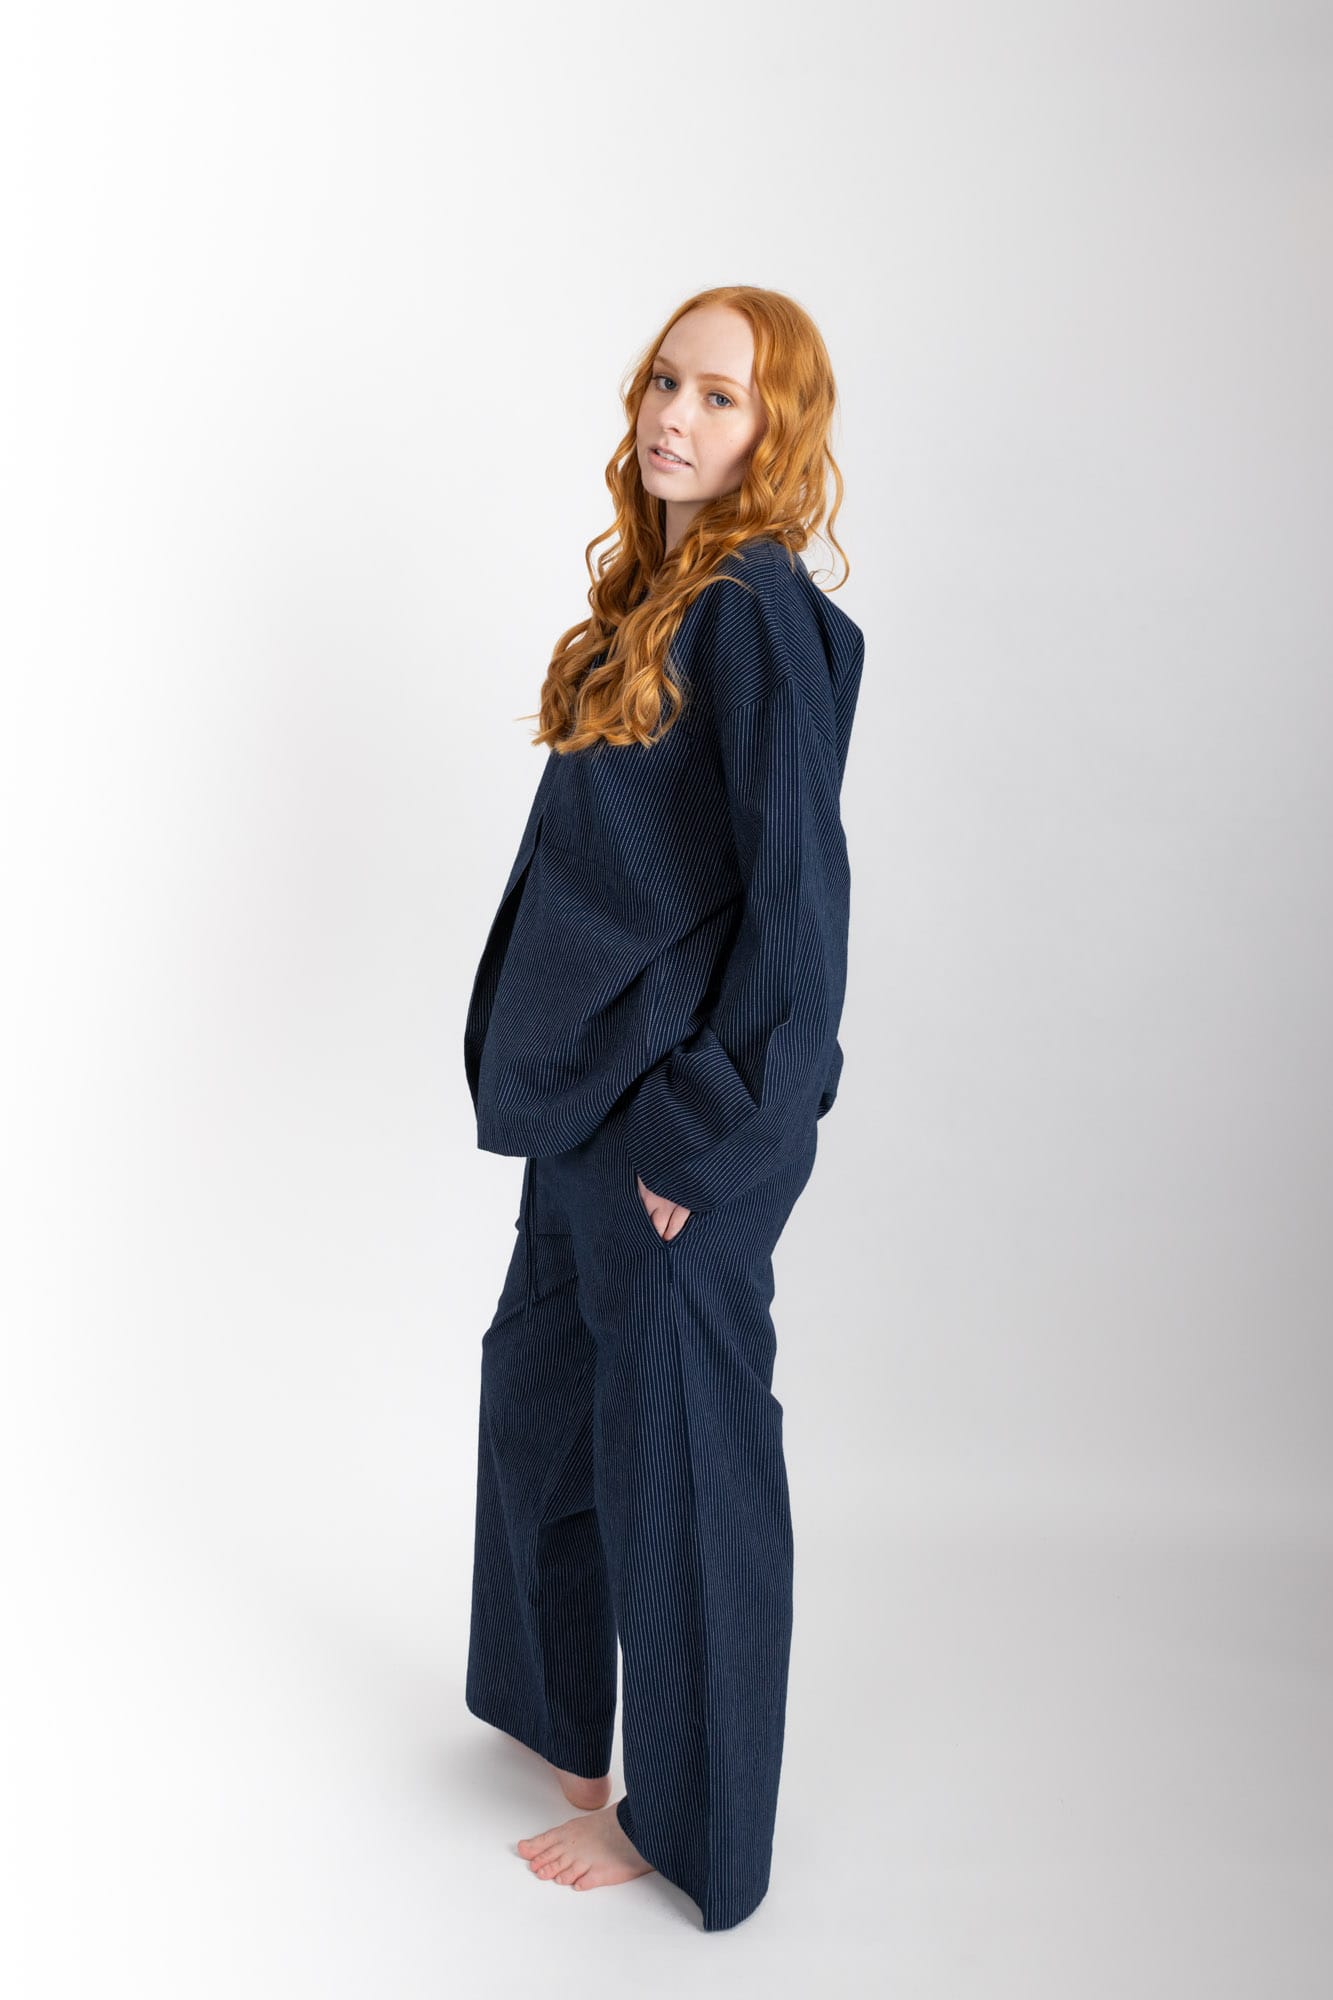 Women’s sleepwear set featuring an oversized, dropped-shoulder, button-through shirt, with natural shell buttons.  The loose-fit, straight-leg pants have an elasticated waist, flat front, and drawstring detail, and are comfortable and flattering. Made from 100% organic cotton in Navy Pinstripe, both pieces have been finished with French seams.